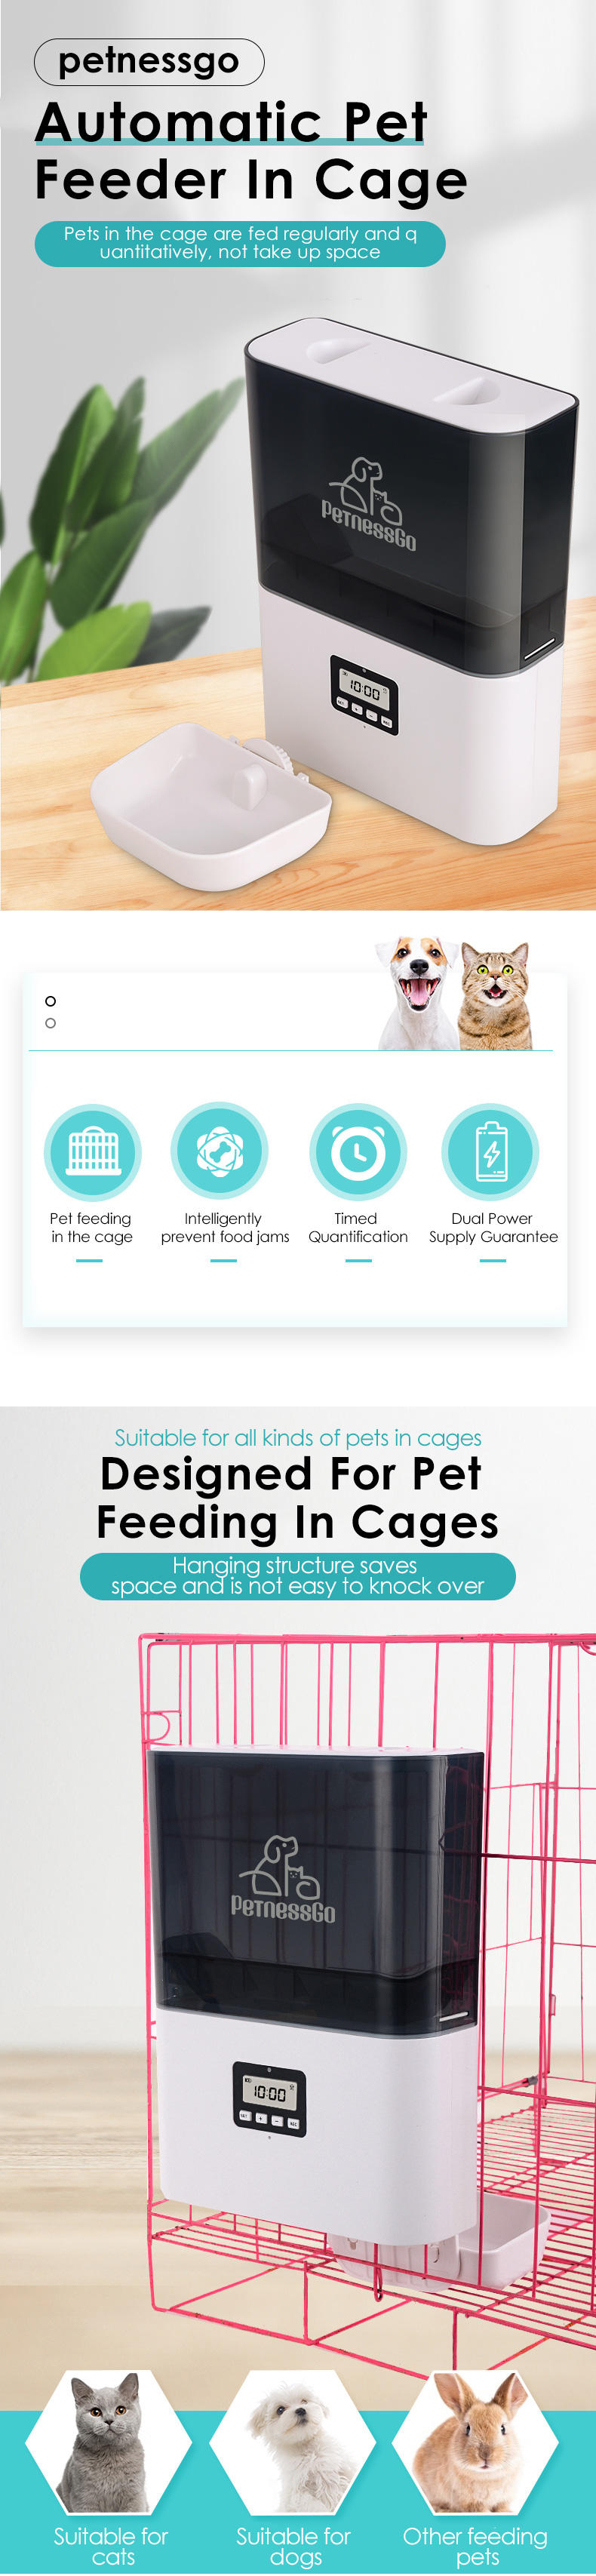 Automatic Smart Food Feeder in The Cage (1)